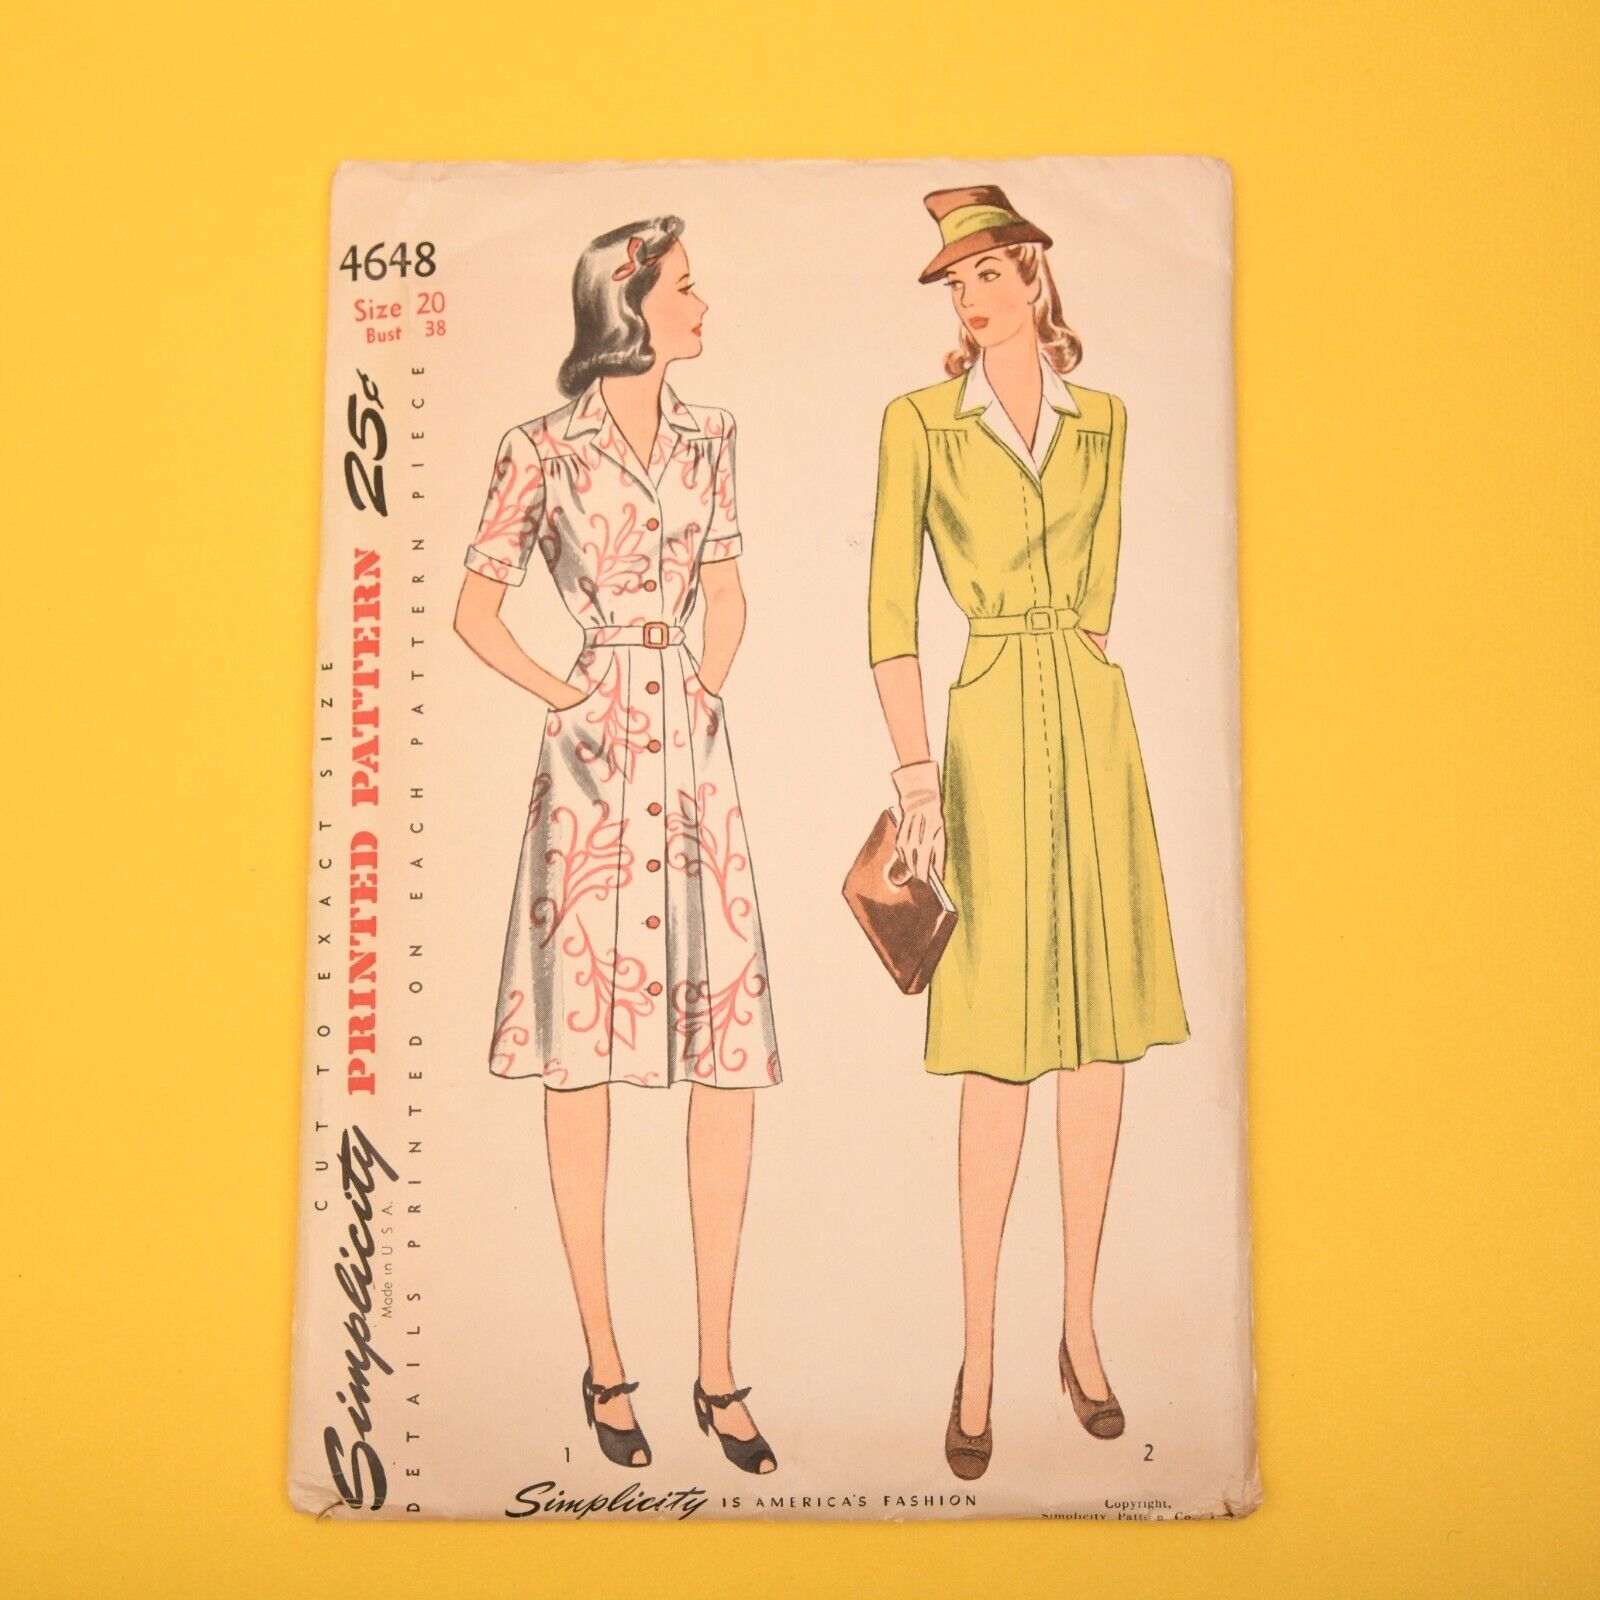 Vintage 40s Simplicity Notched Collar Dress Sewing Pattern 4648 Bust 38 Complete